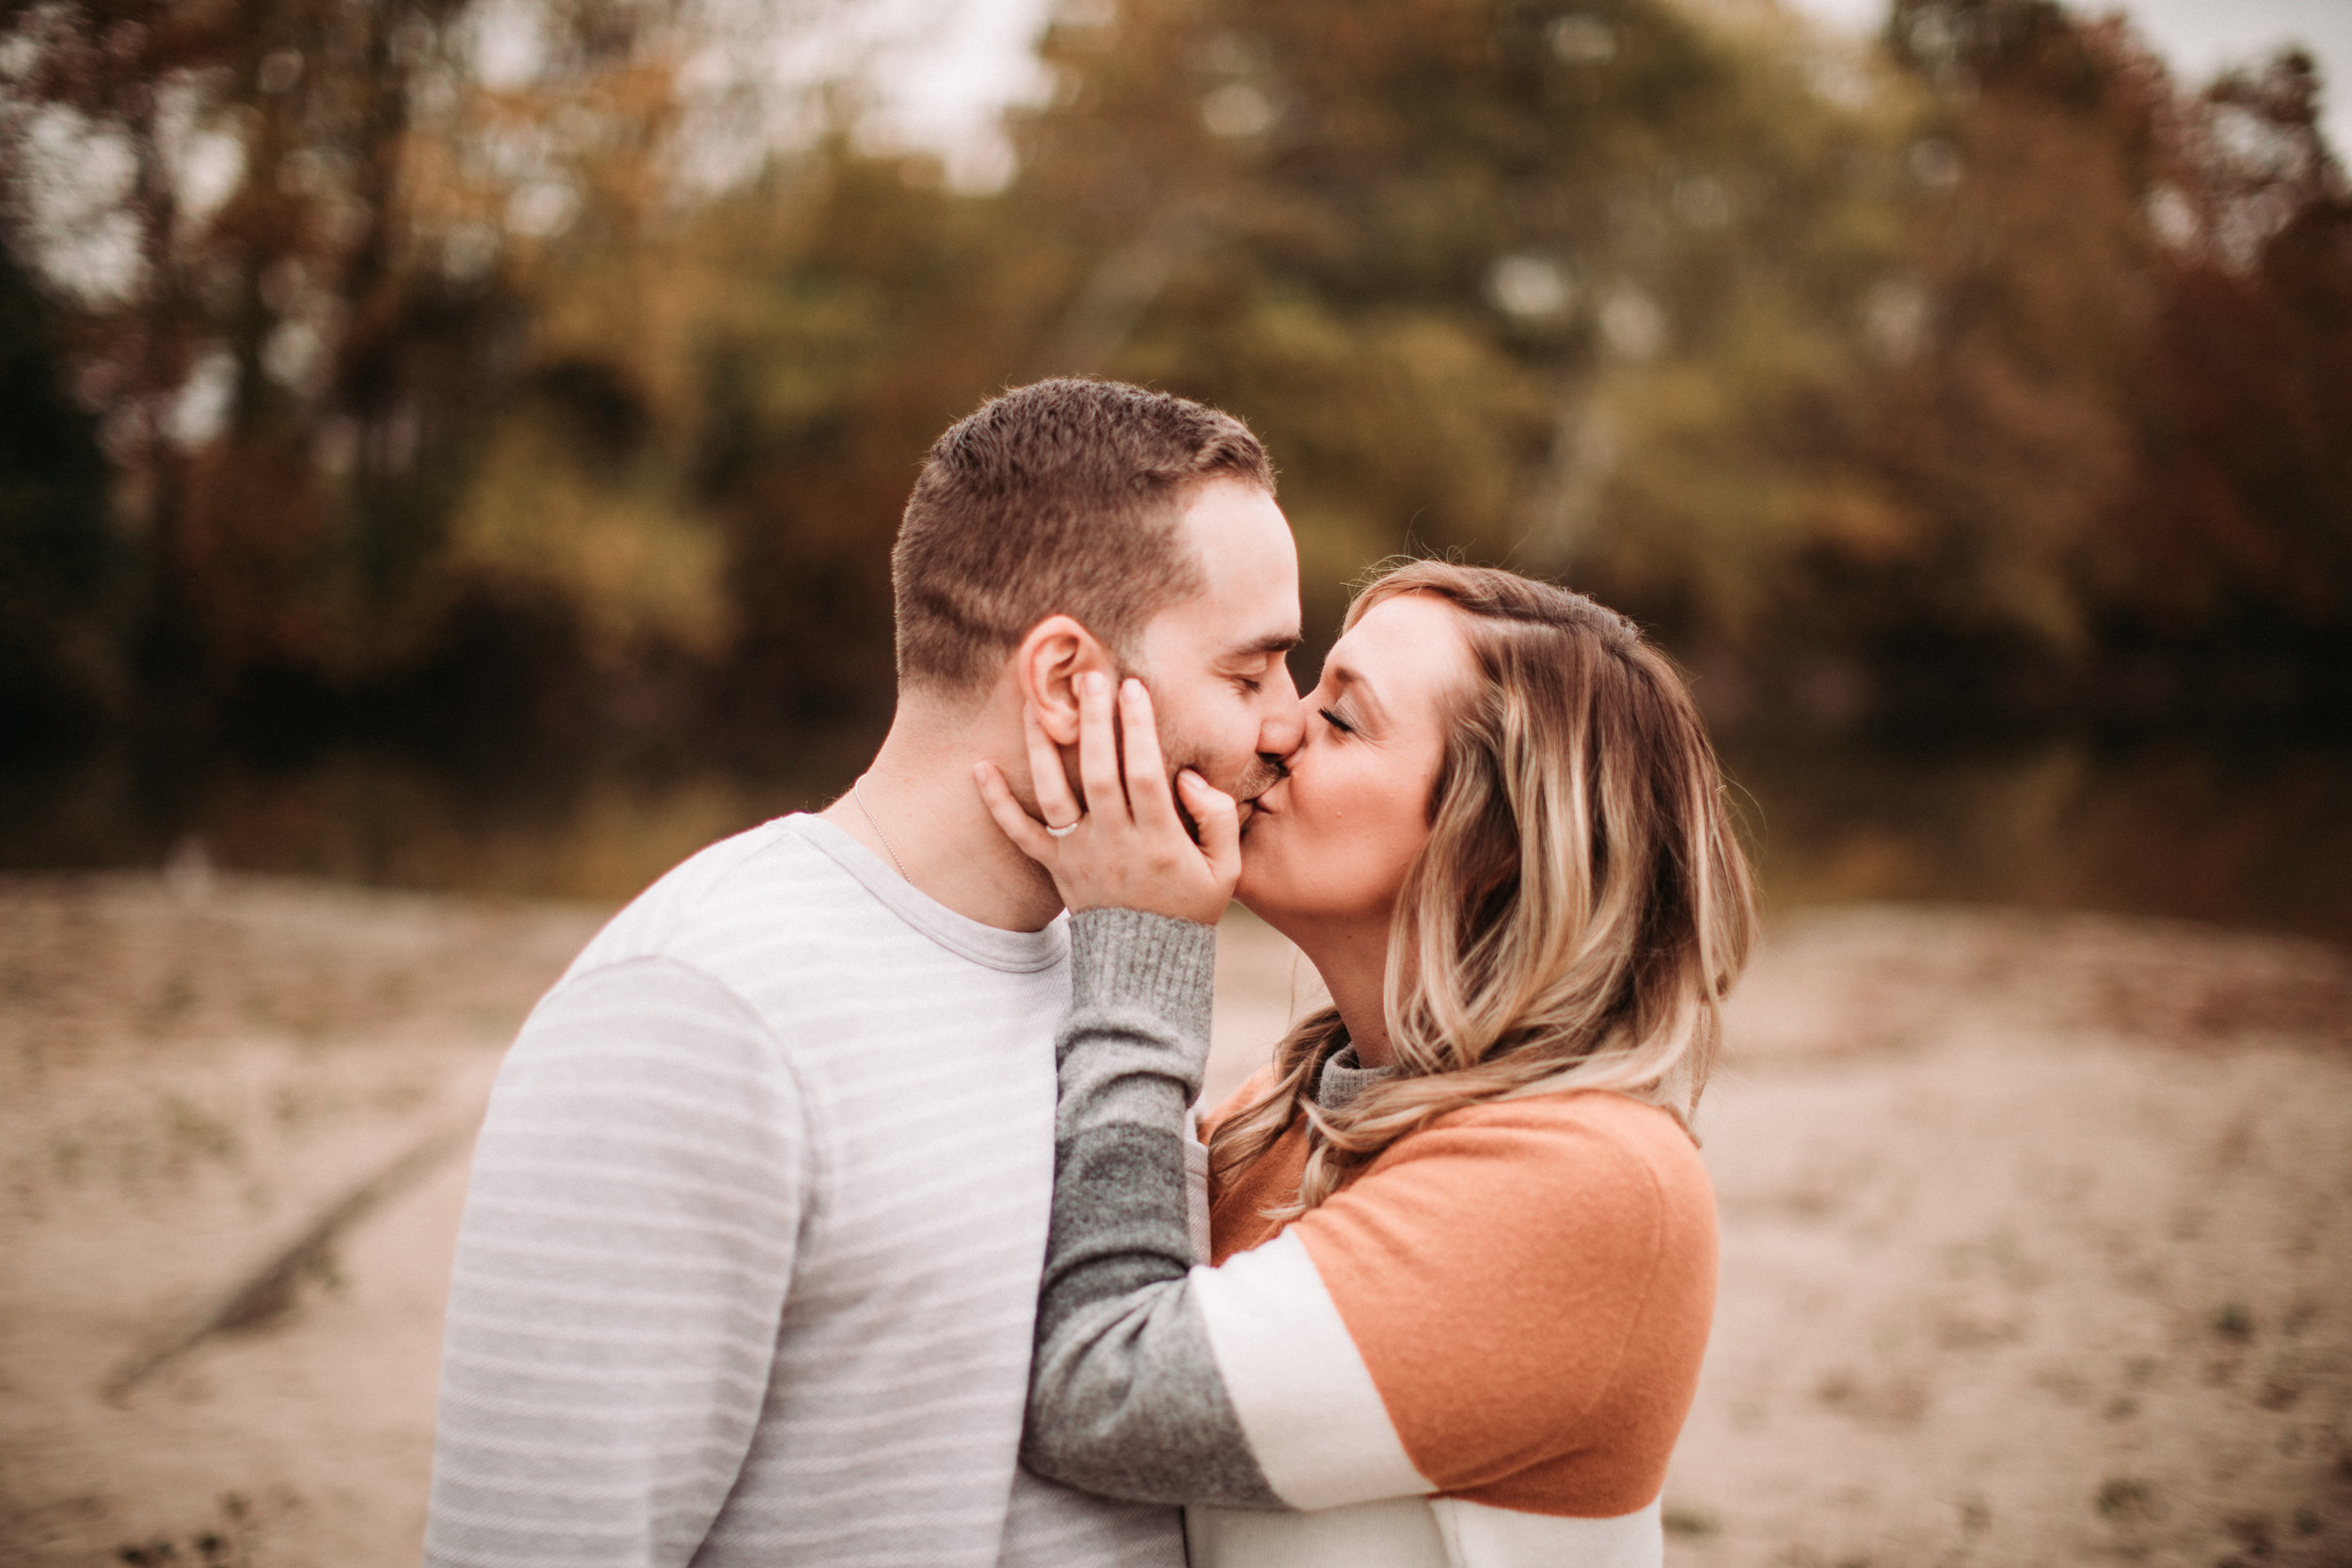 Souther Indiana Fall Engagement Session-5.jpg